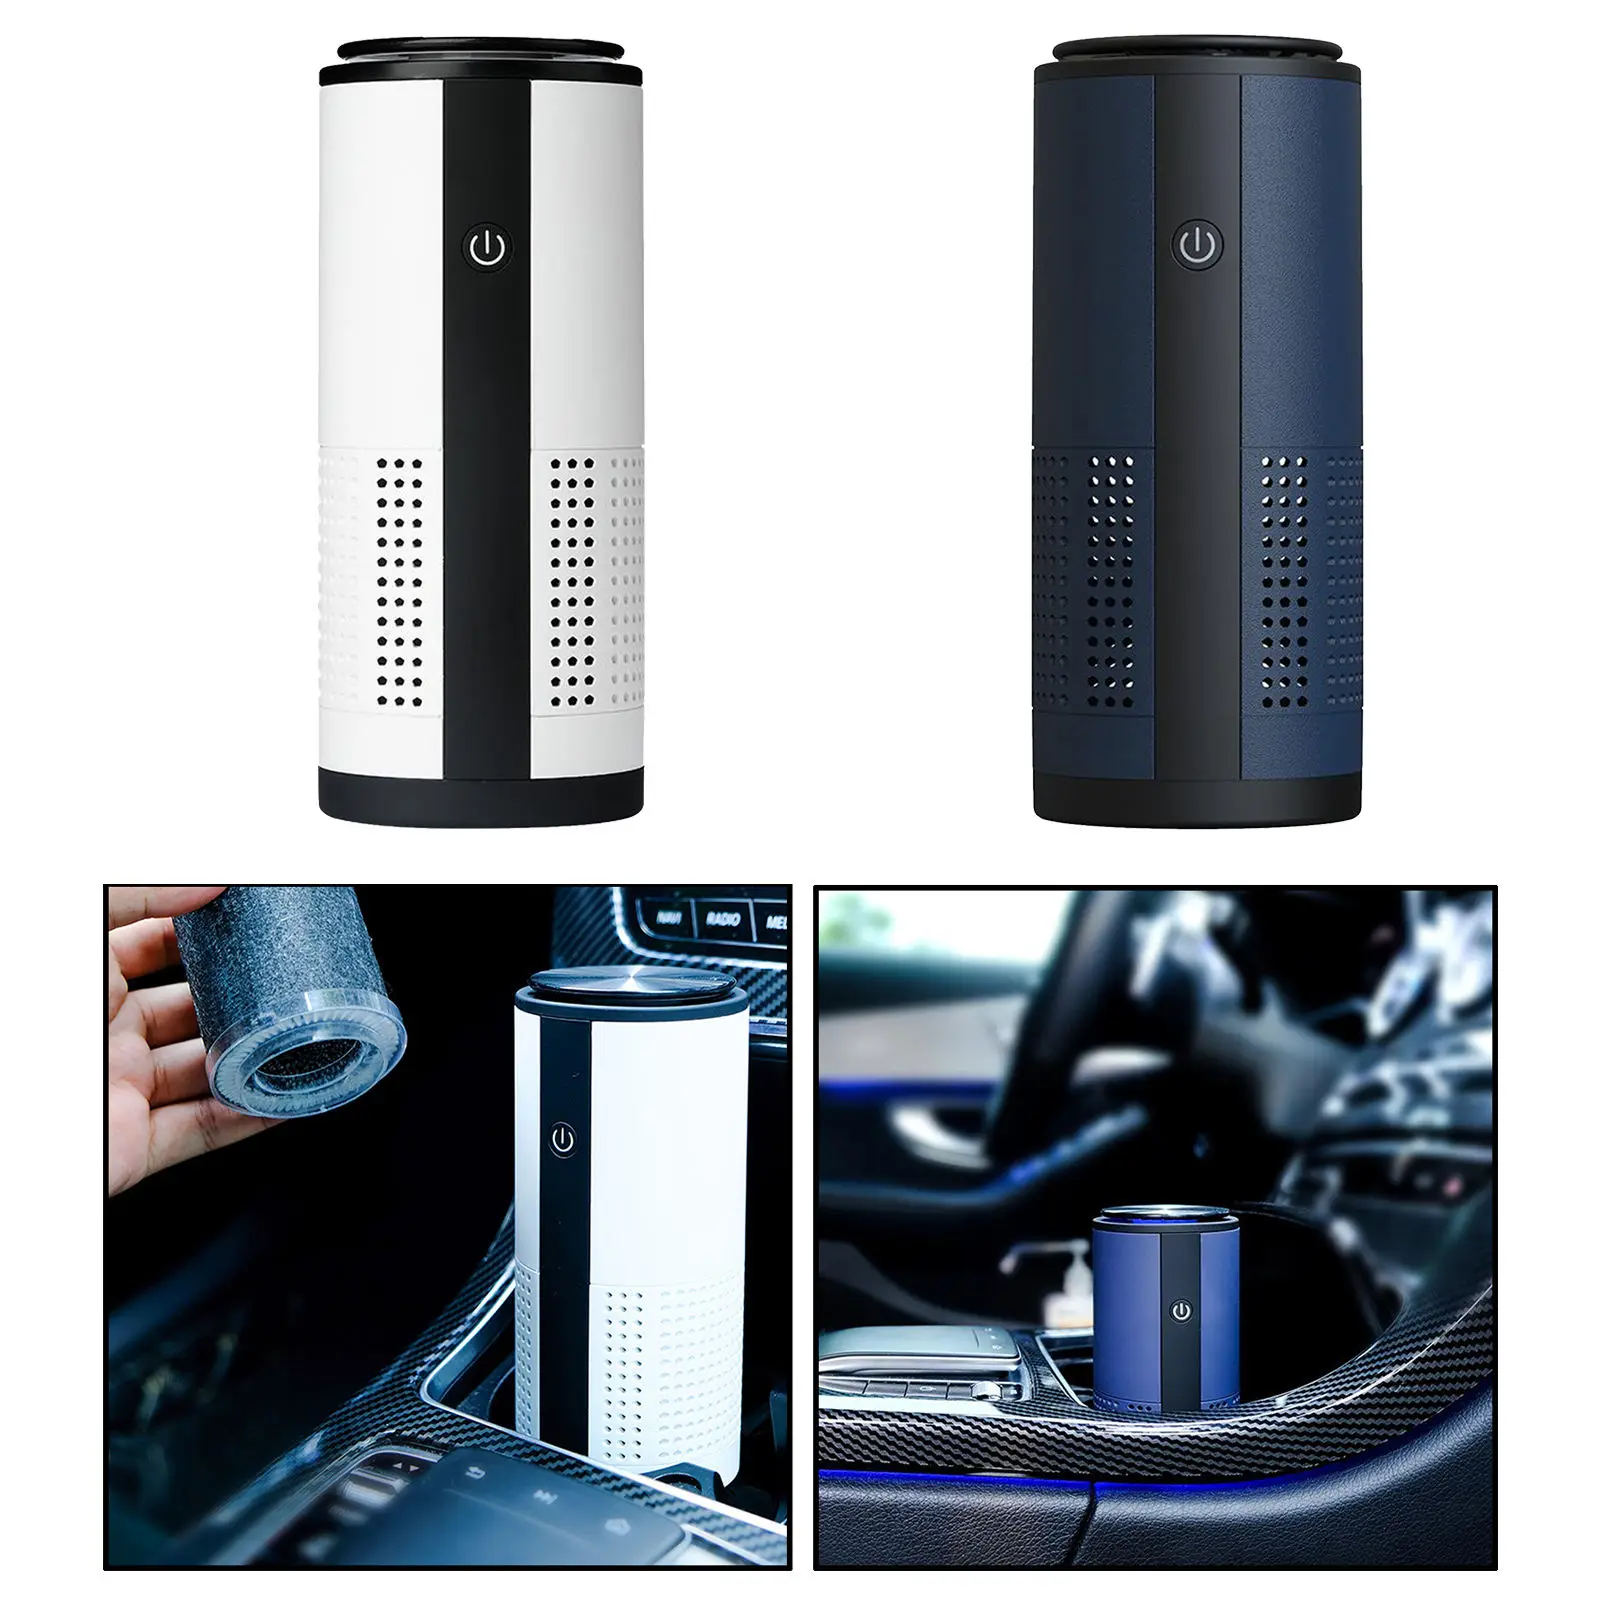 Portable Air Purifier Air Fresher Odor Remover Eliminates Dust for Vehicles Home Bedroom Low Noise USB Powered